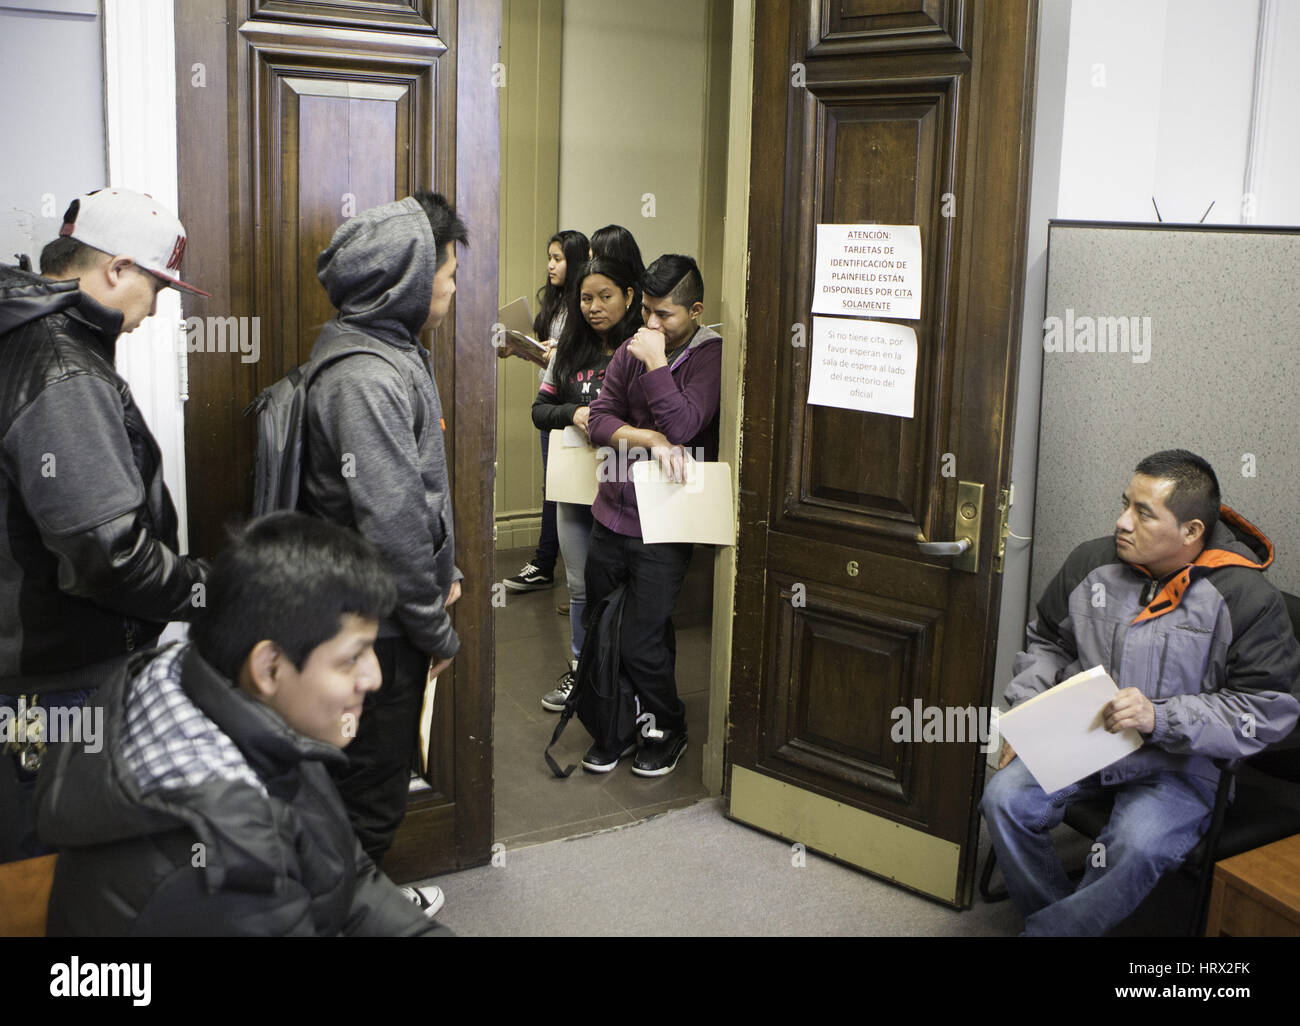 Plainfield, Plainfield, USA. 4th Mar, 2017. UNDOCUMENTED IMMIGRANTS wait in line to get a city identification card at the Plainfield, New Jersey City Hall. Last February the City of Plainfield proclaimed a resolution designating the city as a fair and welcoming community. The City's Clerk office registered nearly 800 immigrants with their ID program since February, 'officials said. Credit: Brian Branch Price/ZUMA Wire/Alamy Live News Stock Photo